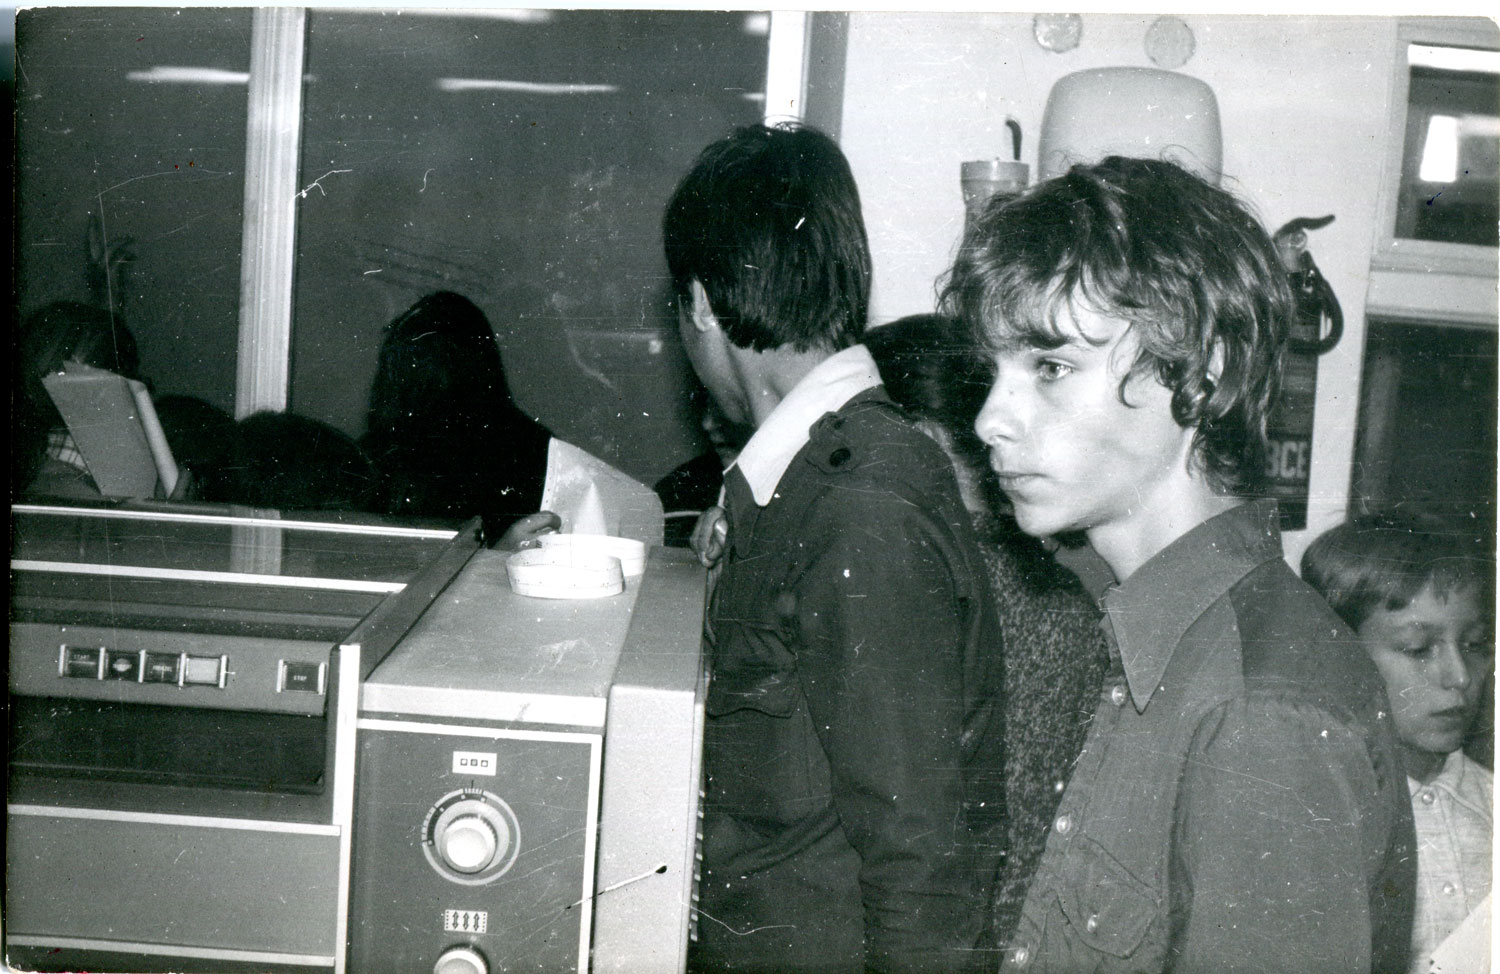 Marcin Borkowski, an early computer enthusiast, during a 1975 computer showcase at the Palace of Culture and Science in Warsaw. Image: Marcin Borkowski’s private archive